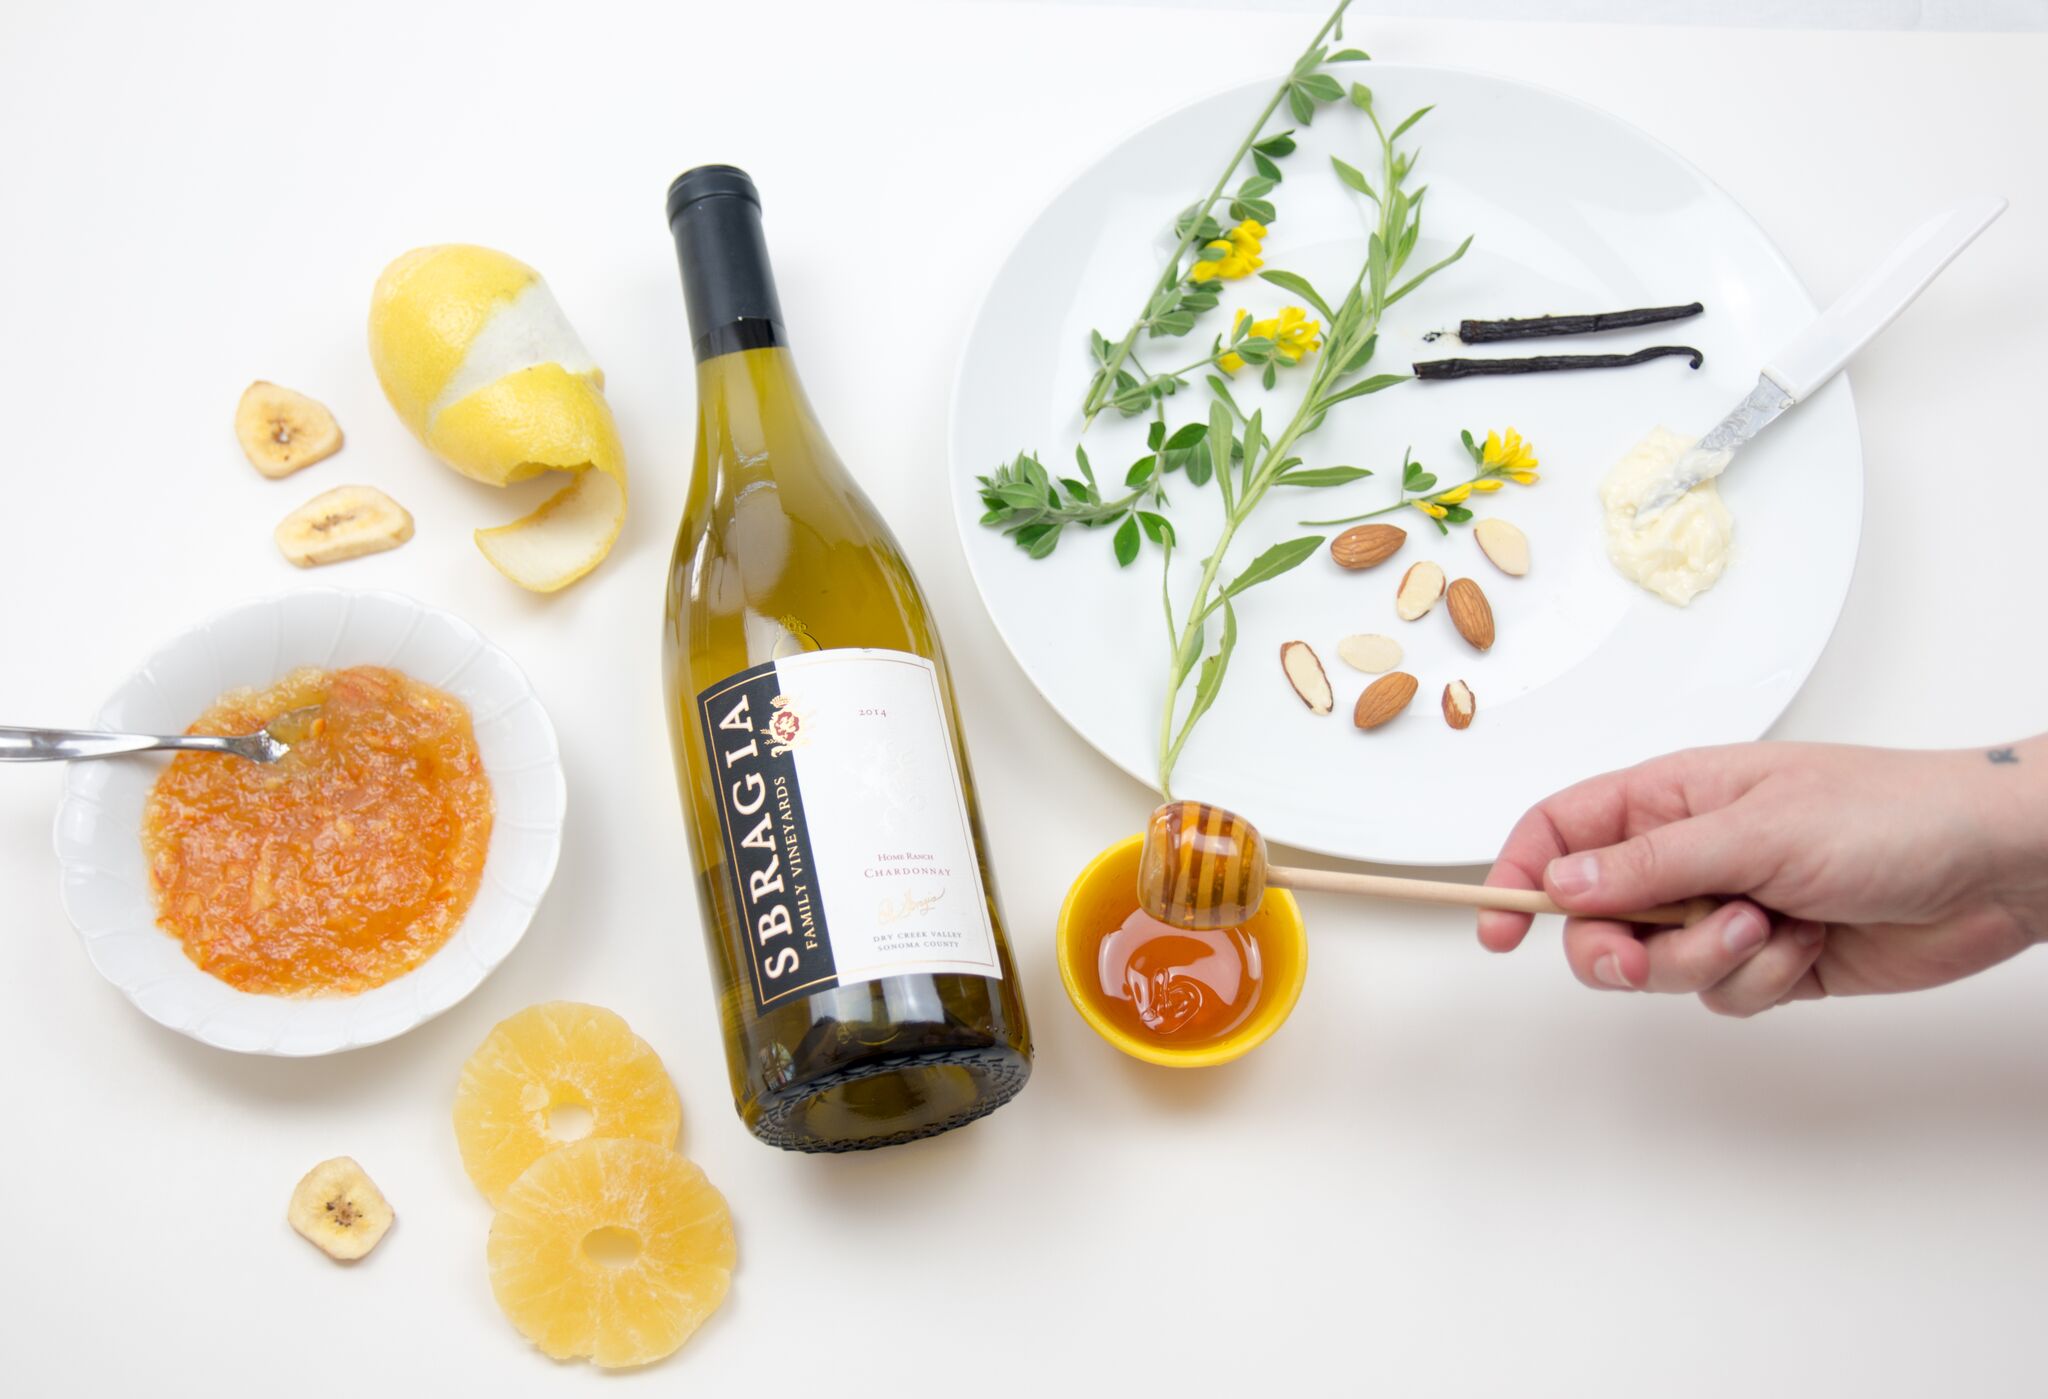 What's in the Bottle Photo featuring Sbragia Chardonnay and typicall chardonnay flavor visuals like lemon, honey, butter and orange marmalade